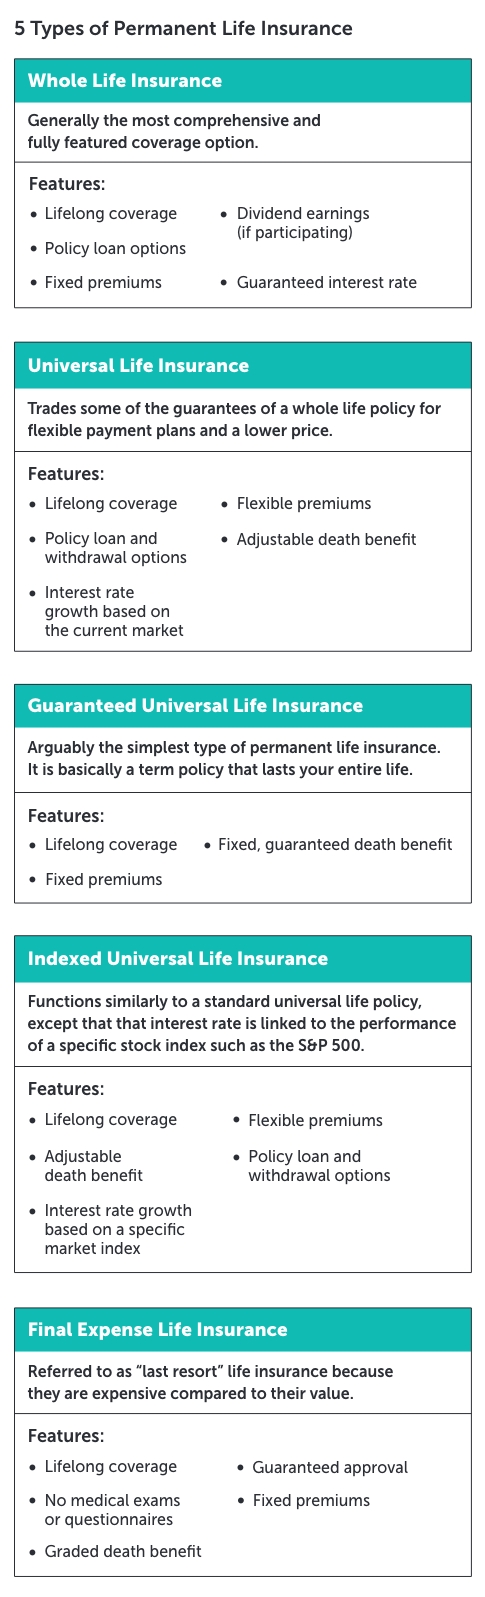 Graphic titled, "5 types of permanent life insurance." Underneath are tables that define and describe the features of each policy option.